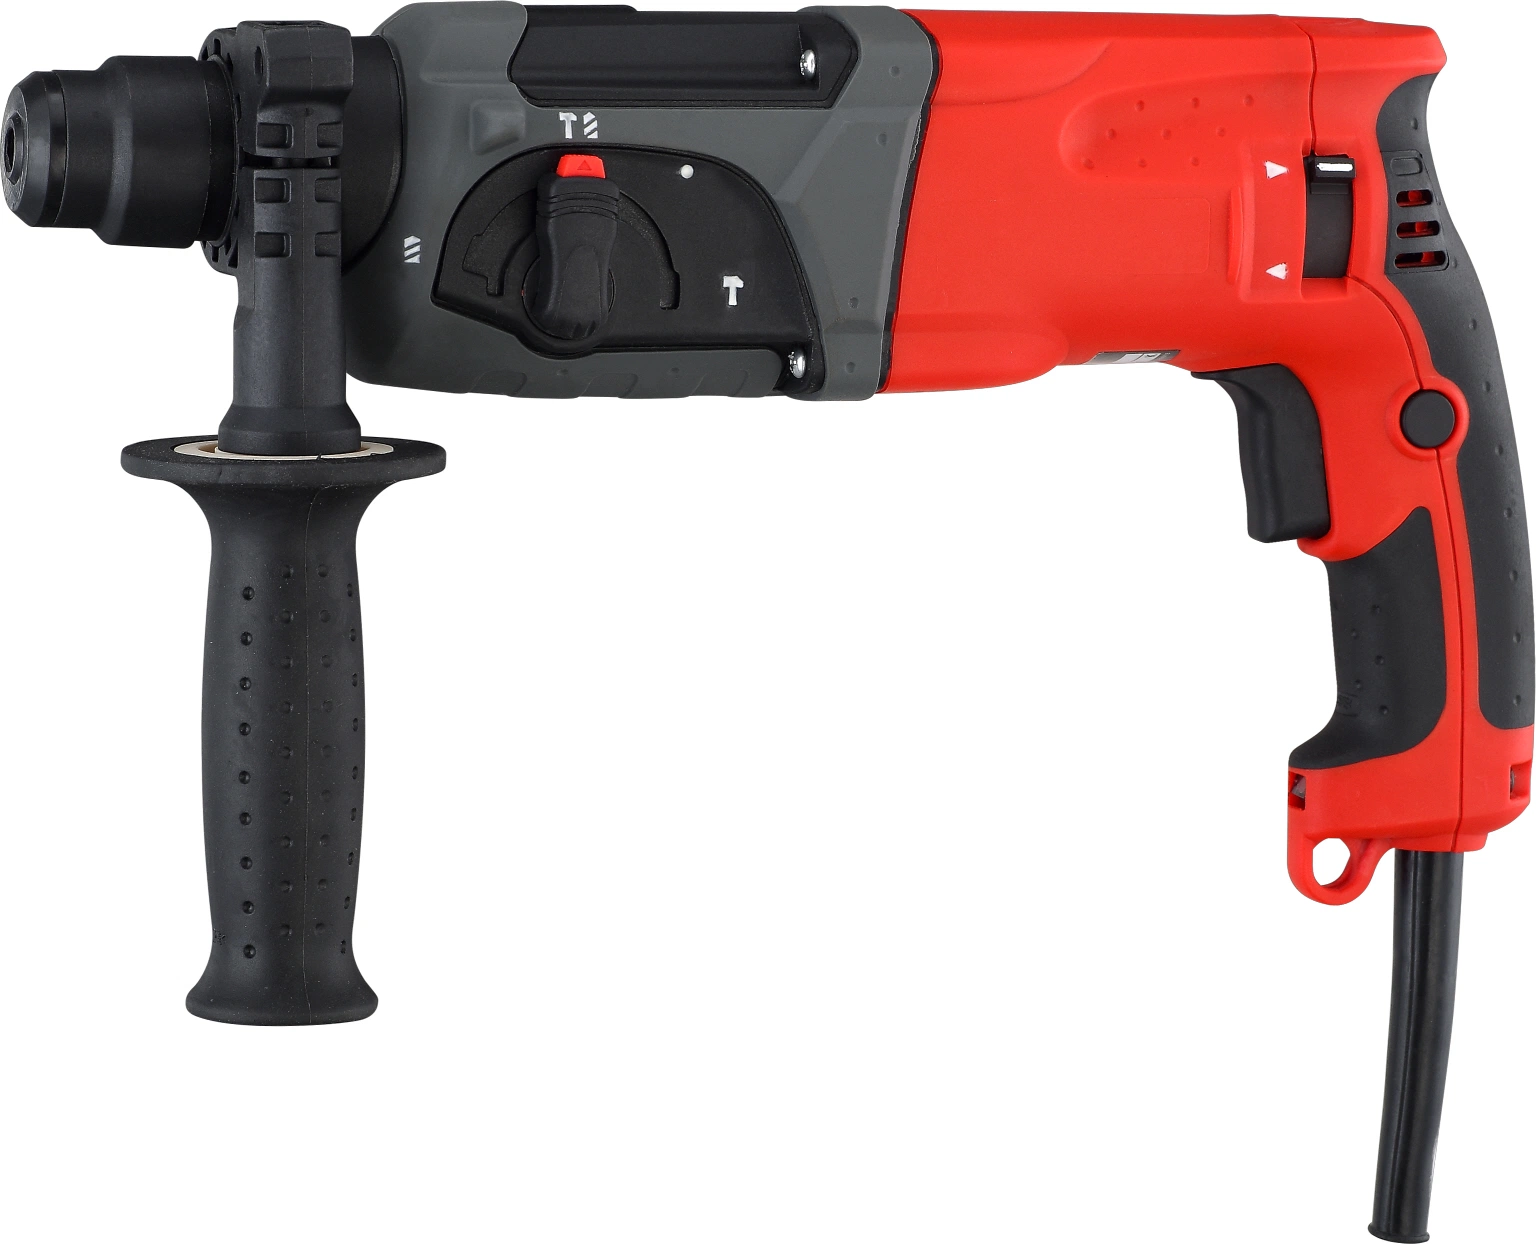 2470 Japanese Model 780W 24mm Power Tools of Rotary Hammer